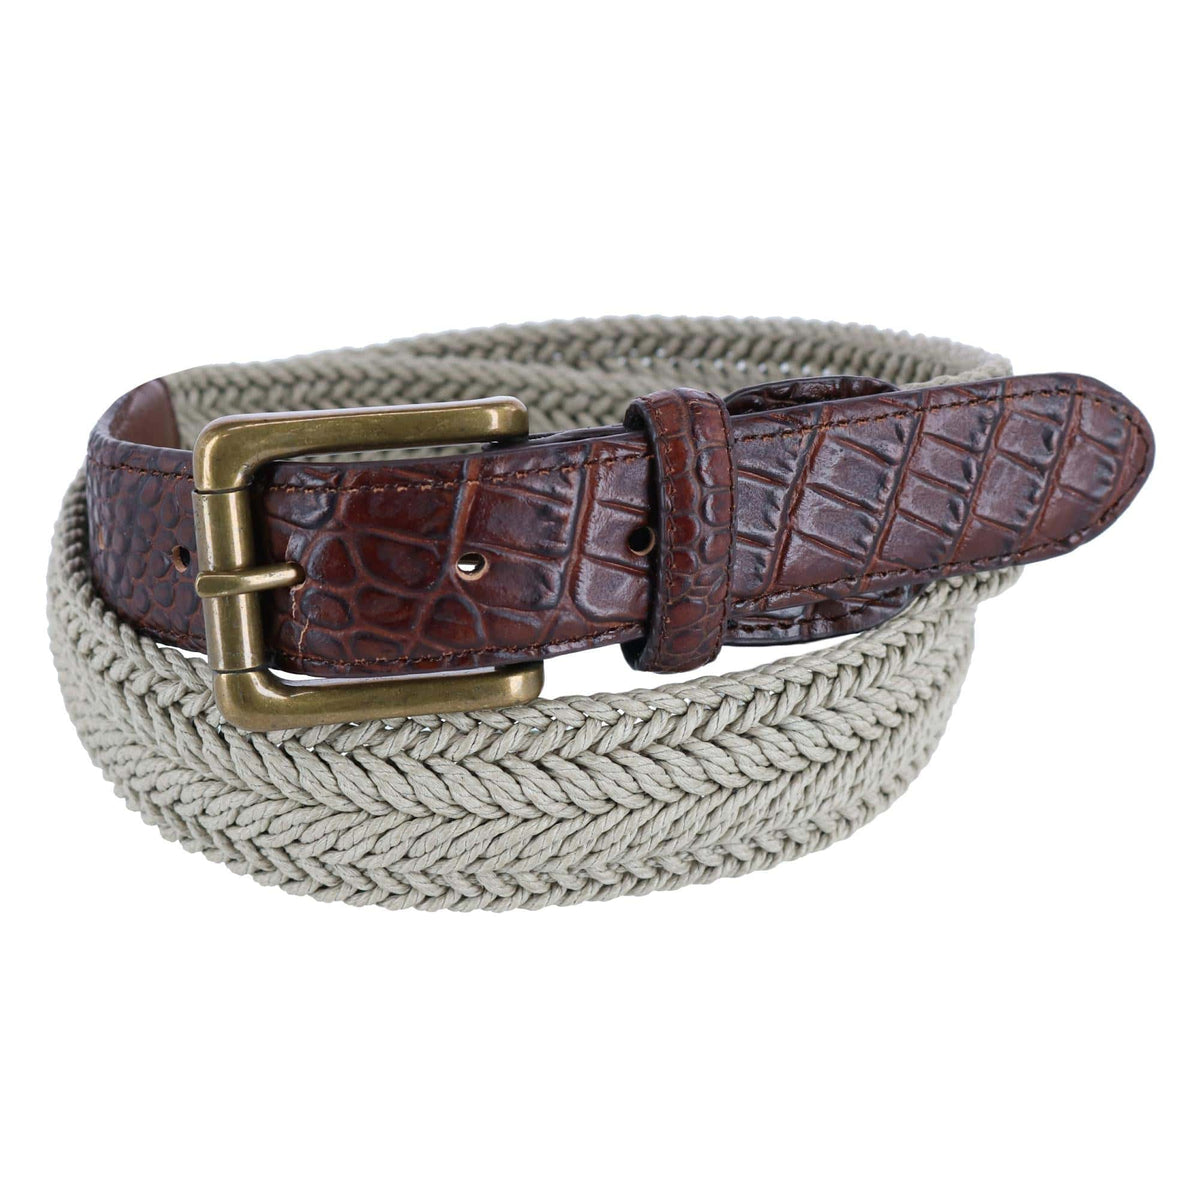 Men's Big & Tall Waxed Braided Belt with Croc Print Ends by CTM ...